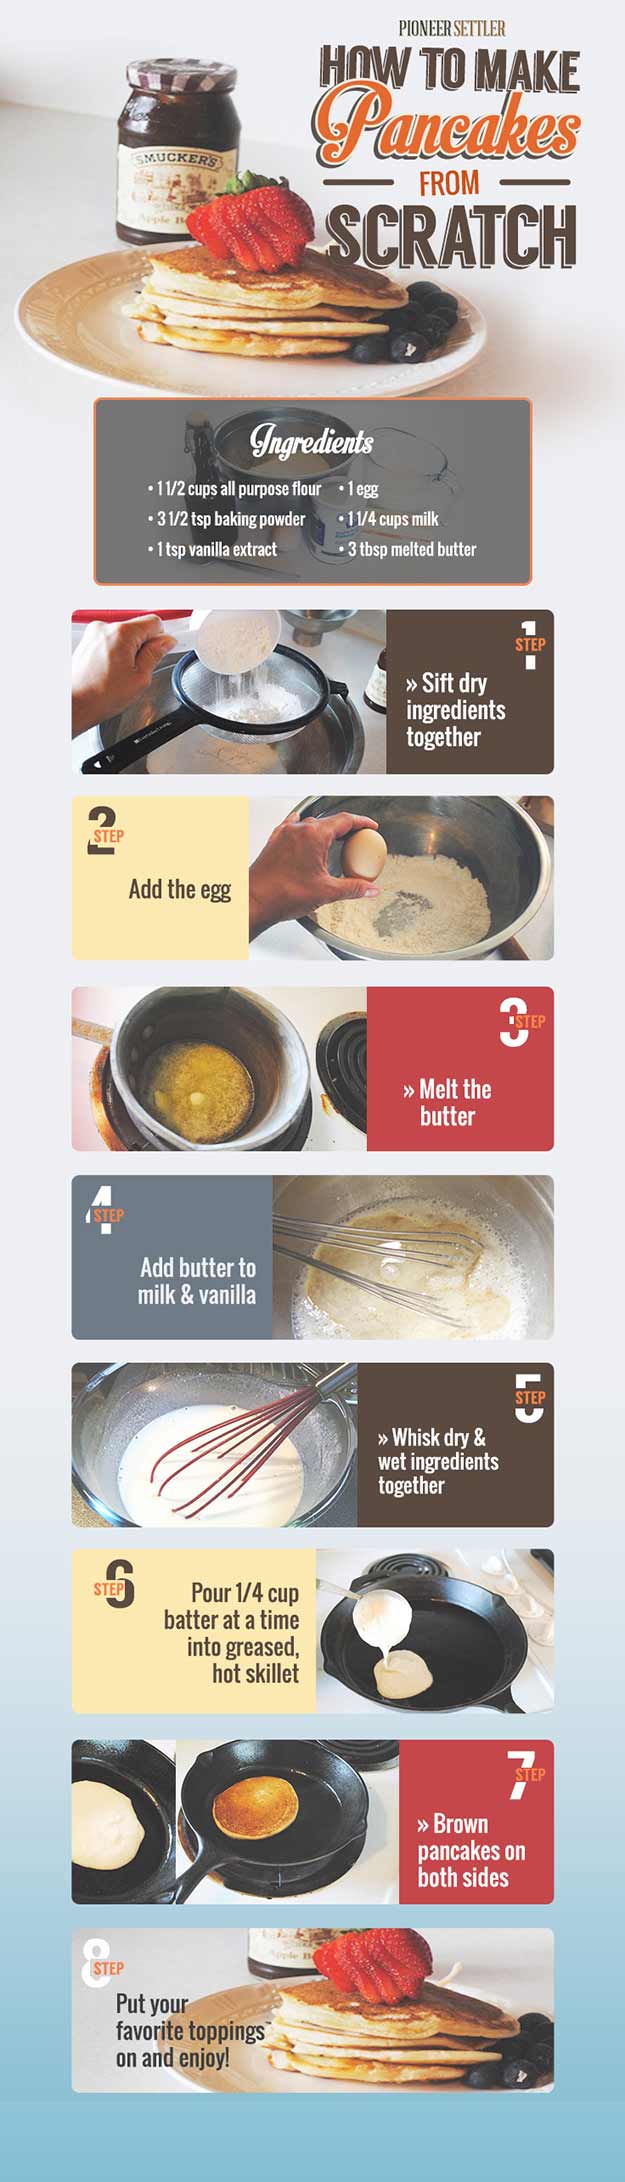 Pinterest Placard | How to Make Pancakes from Scratch | Perfect Pancake Recipe